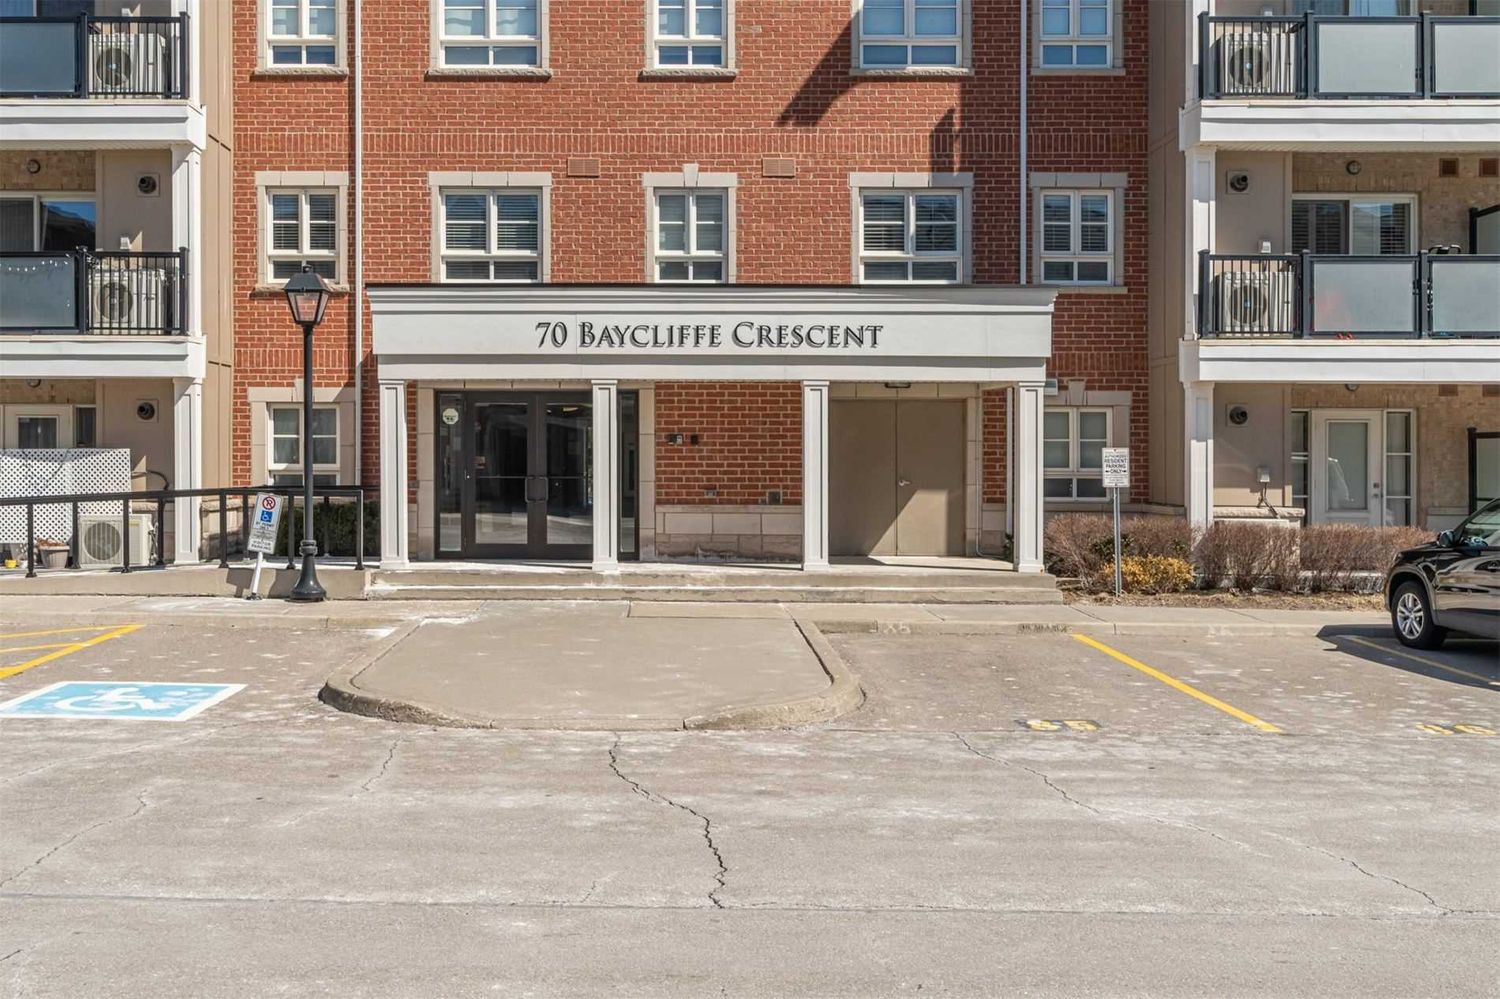 40-120 Baycliffe Crescent. Baycliffe Condos is located in  Brampton, Toronto - image #3 of 3